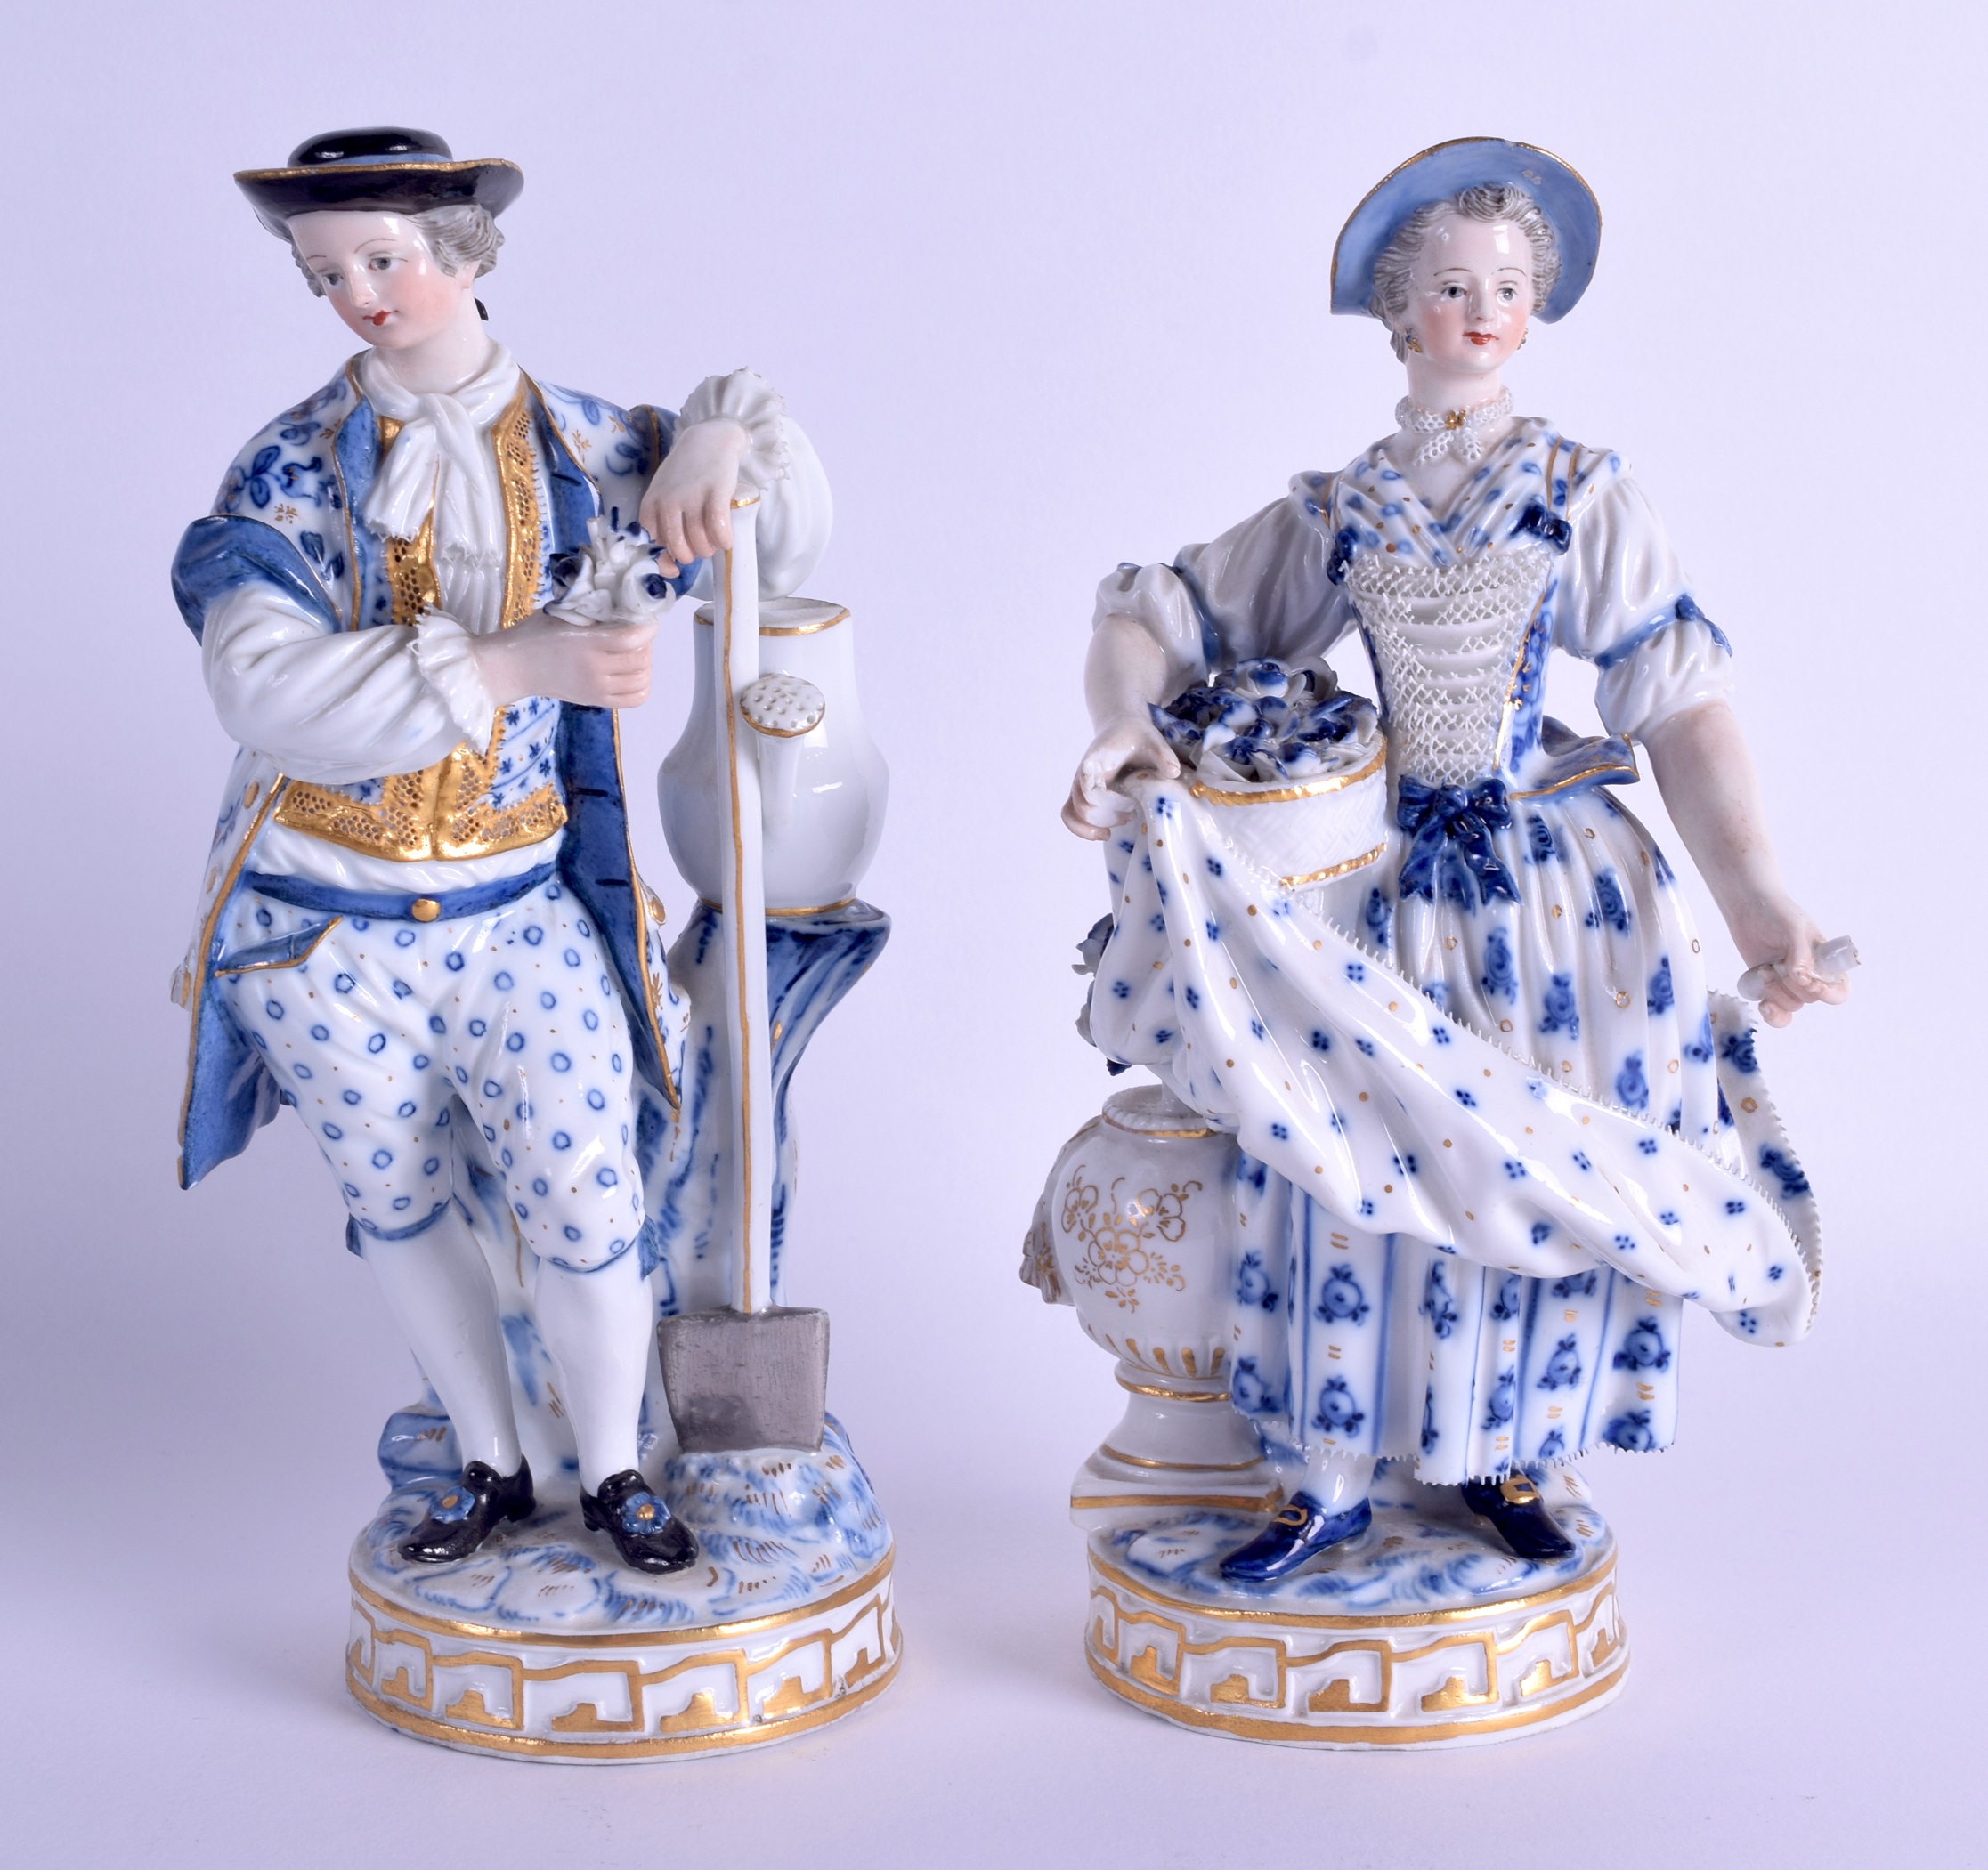 A PAIR OF 19TH CENTURY MEISSEN PORCELAIN FIGURES OF GARDENERS painted with blue flowers. 19 cm